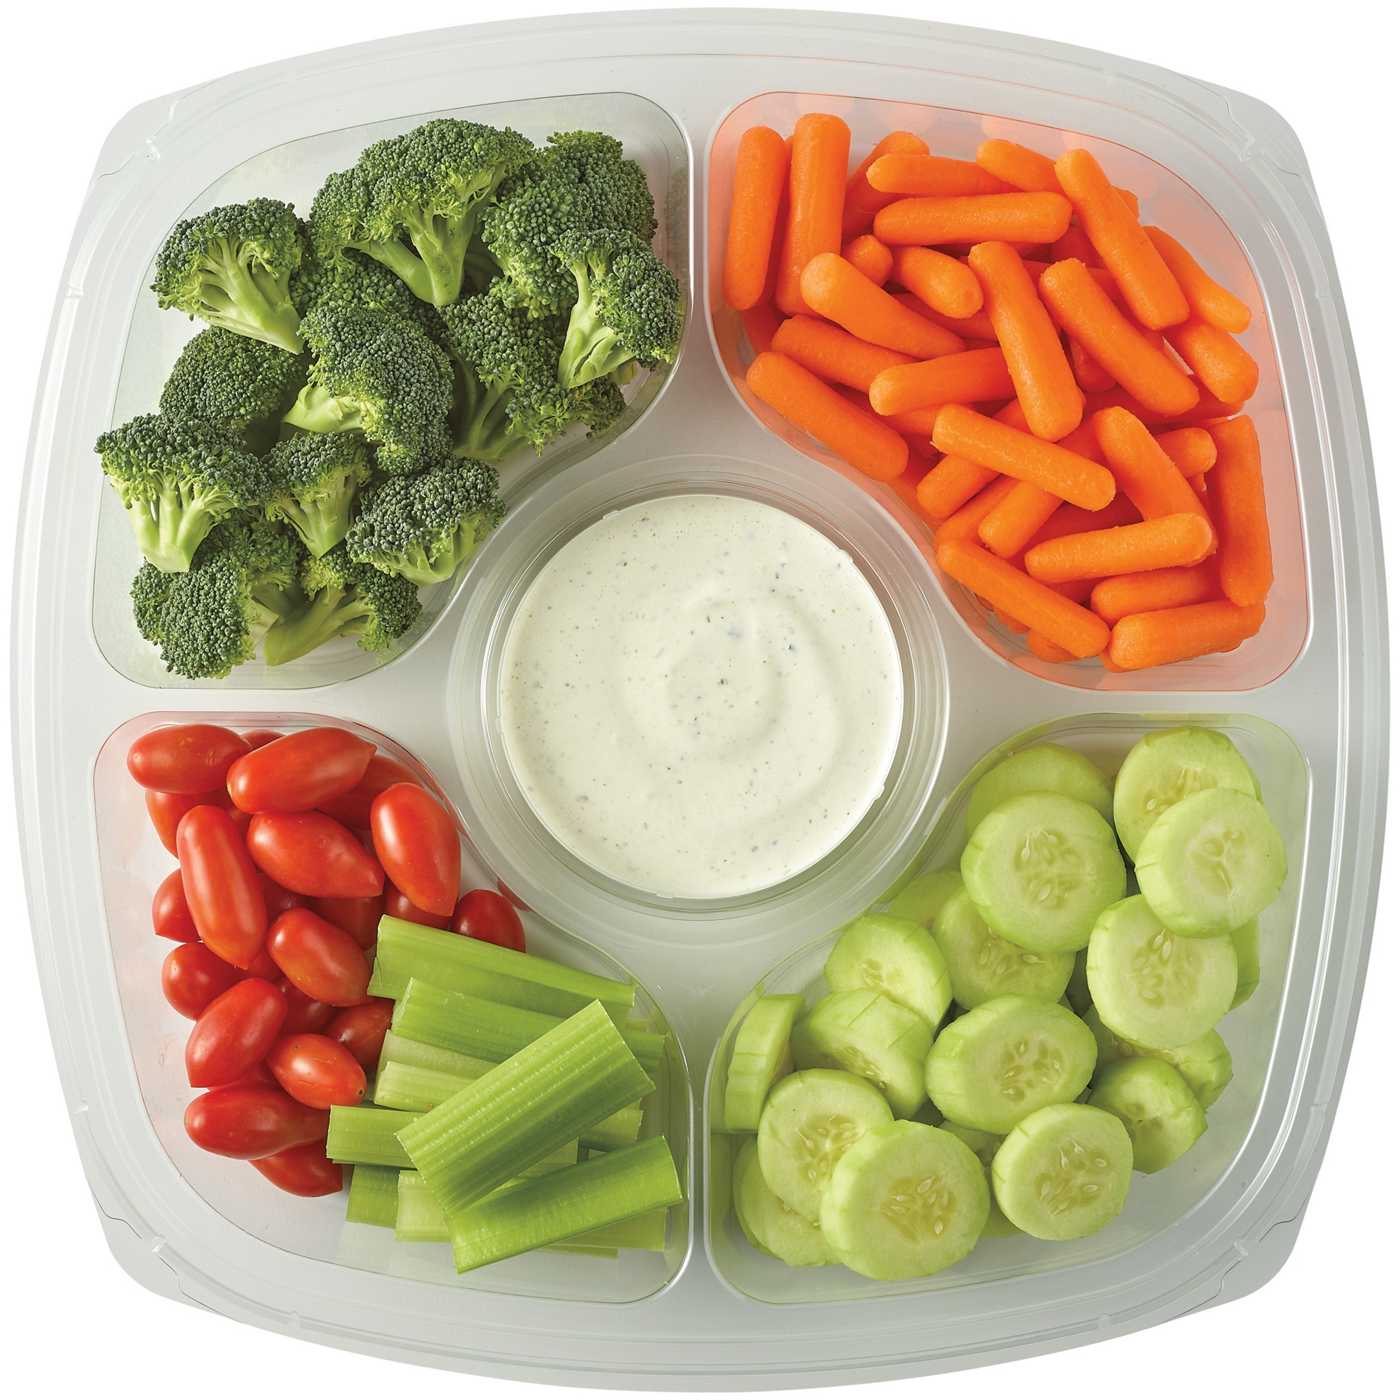 H-E-B Large Fresh Veggie Party Tray - Ranch Dip; image 1 of 2